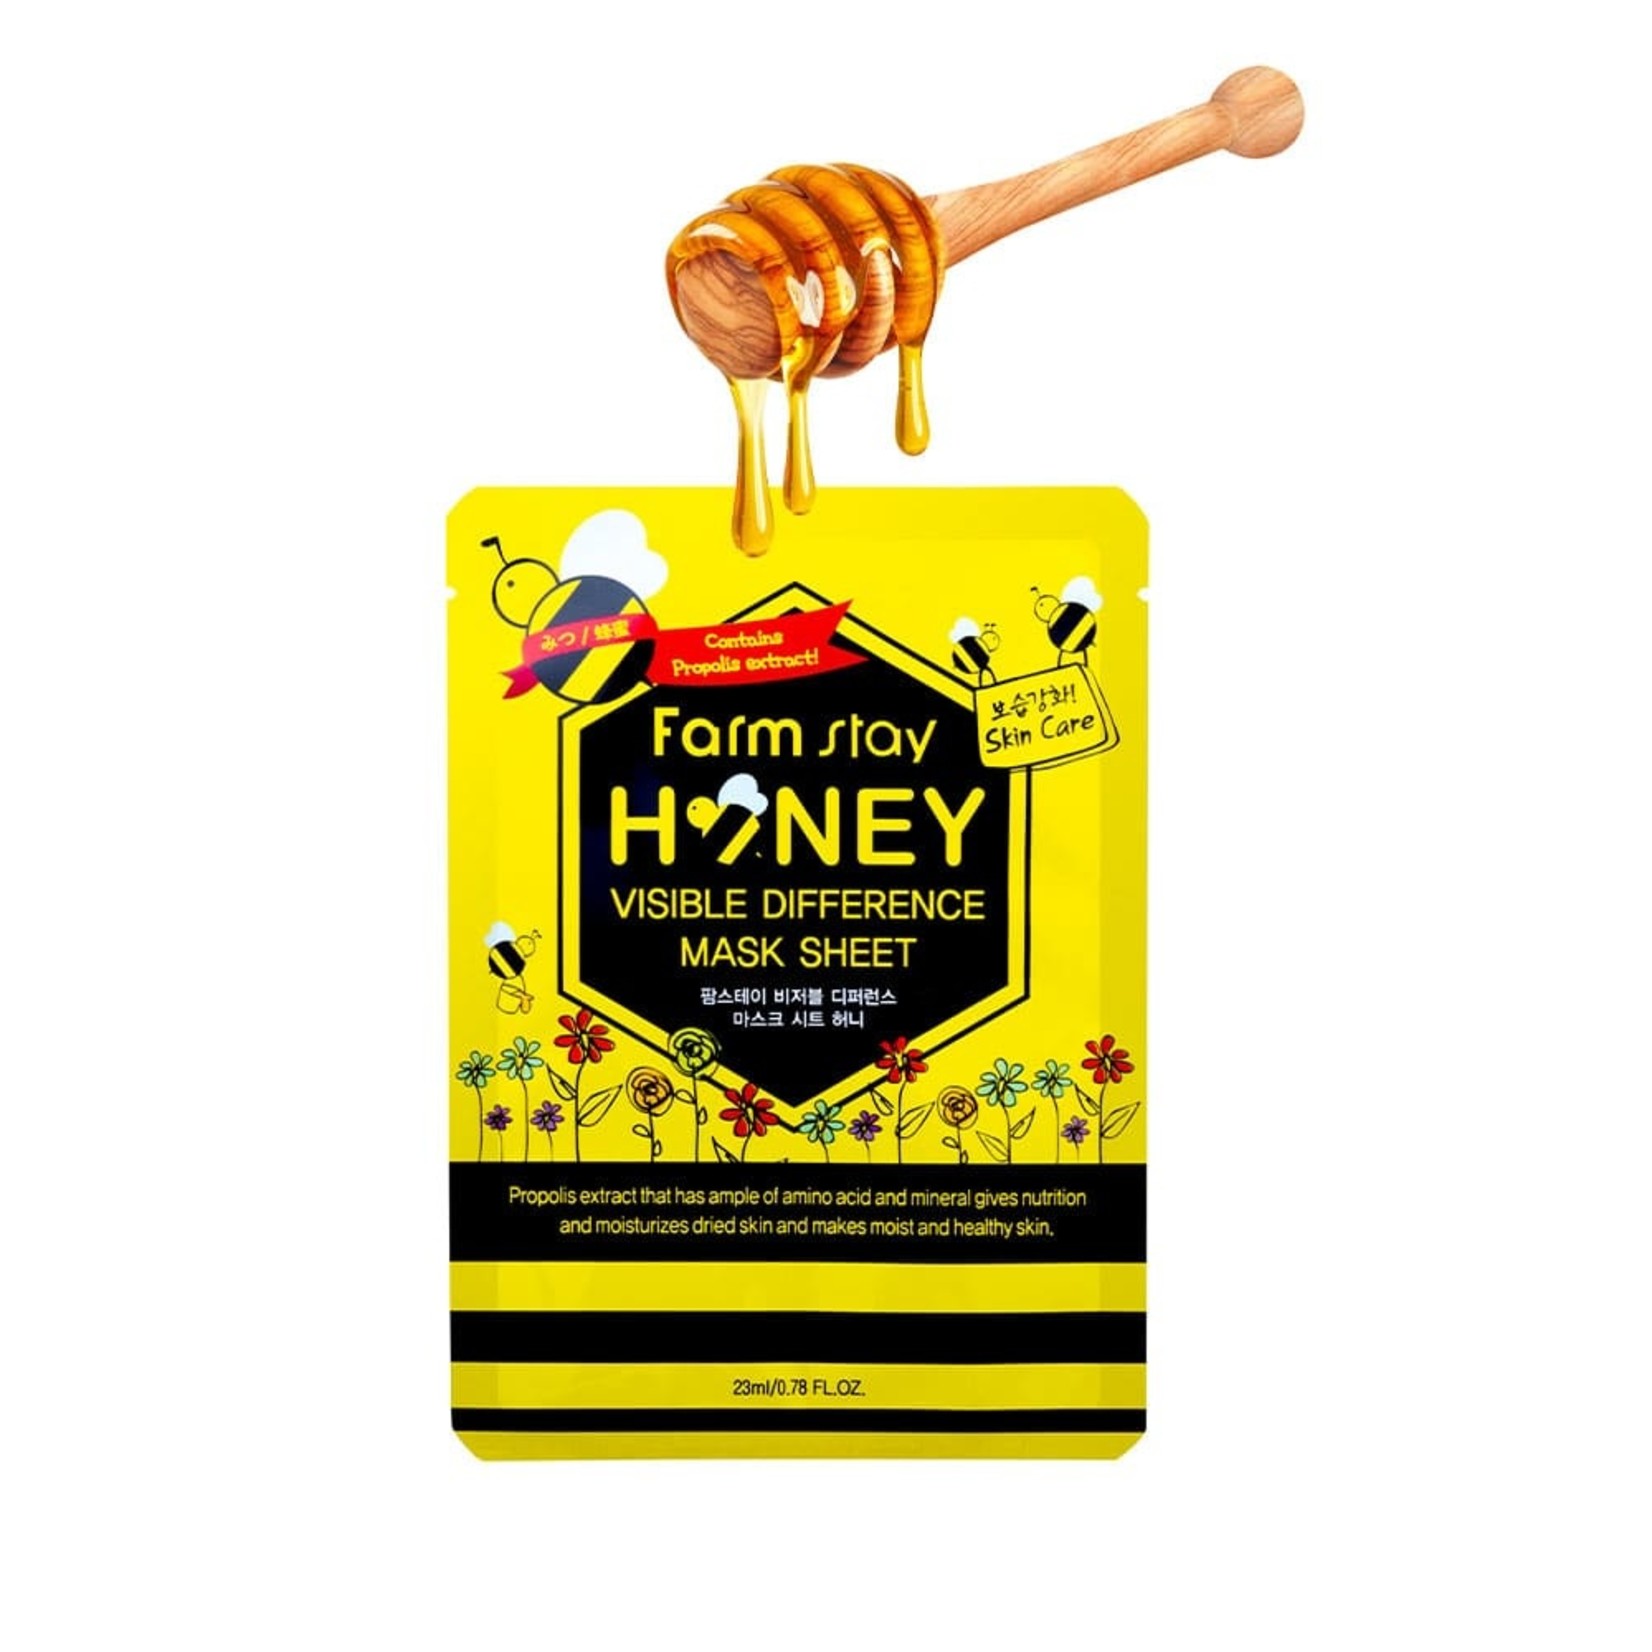 Farm stay Visible Difference Mask Sheet HONEY